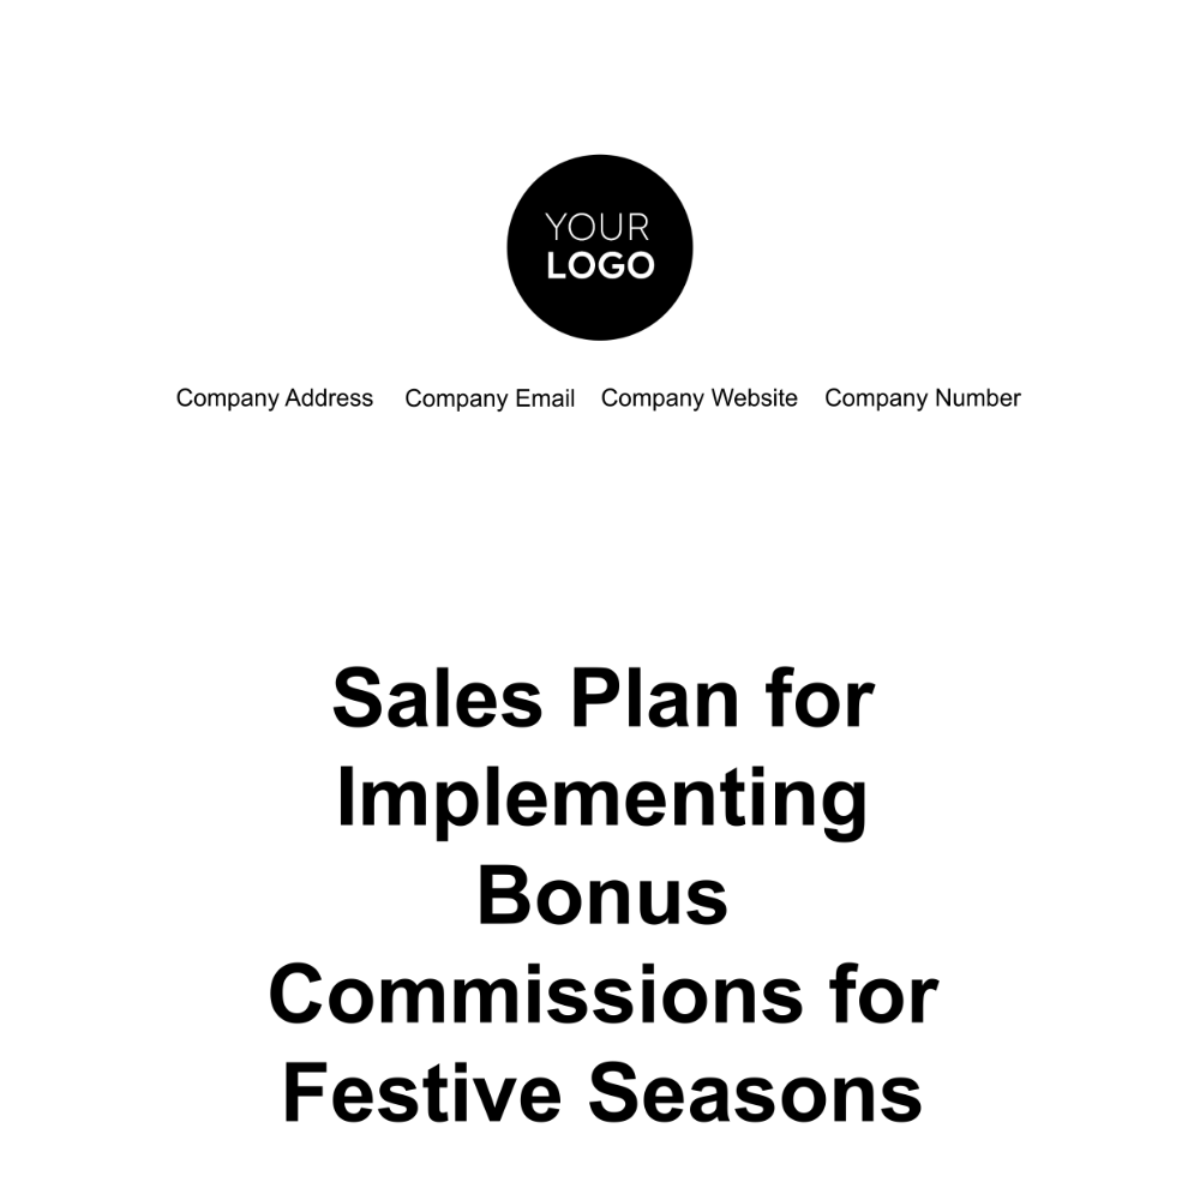 Free Sales Plan for Implementing Bonus Commissions for Festive Seasons Template